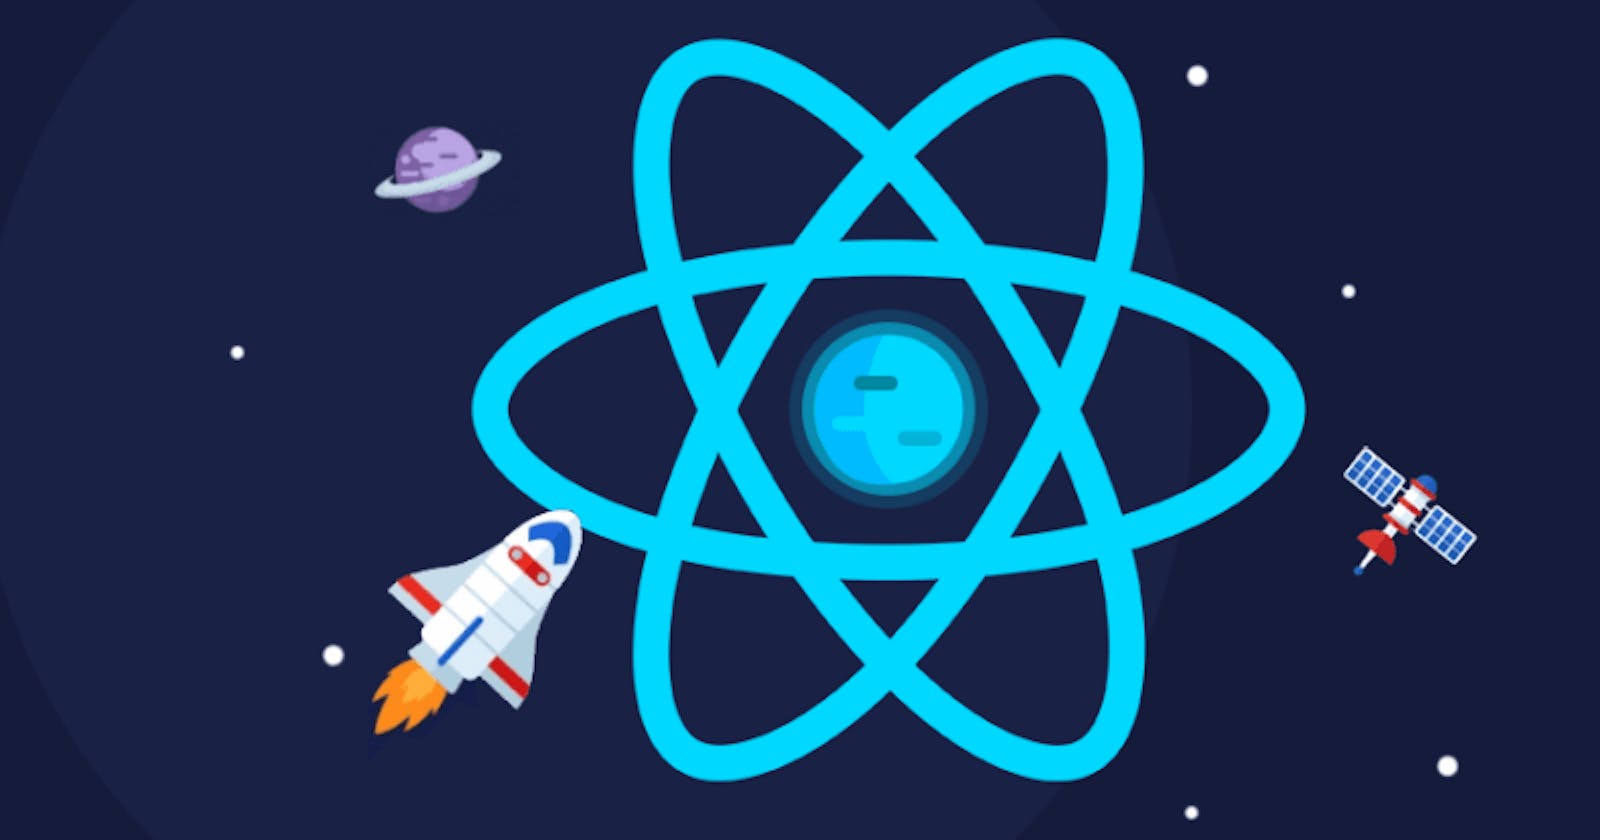 Want to learn Reactjs? Here's  the 2021 resource list for you!